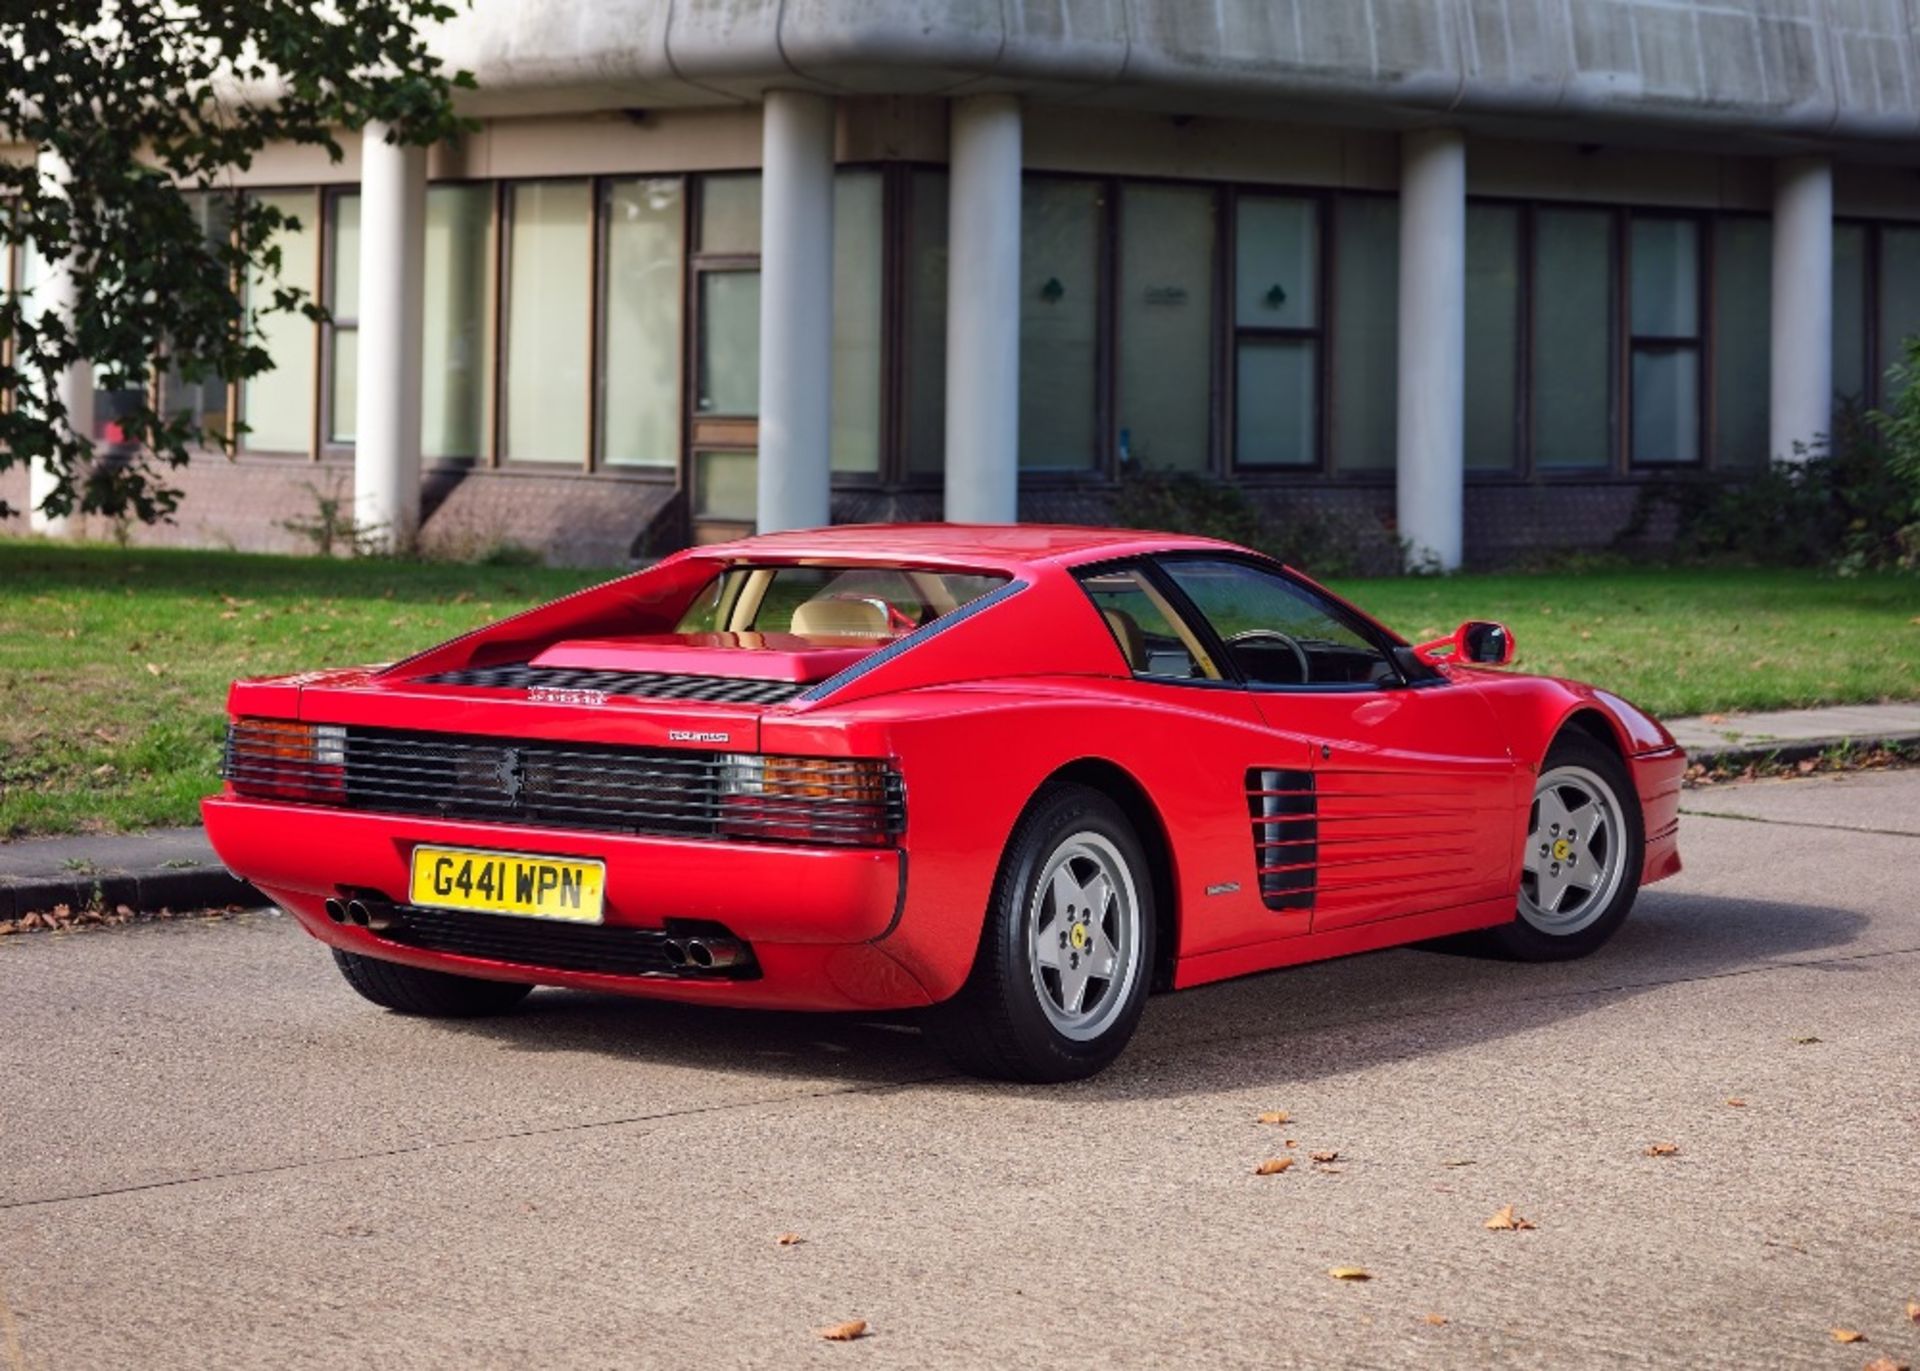 1989 FERRARI TESTAROSSA Registration Number: G441 WPN Chassis Number: ZFFAA17C000082817 Recorded - Image 11 of 59